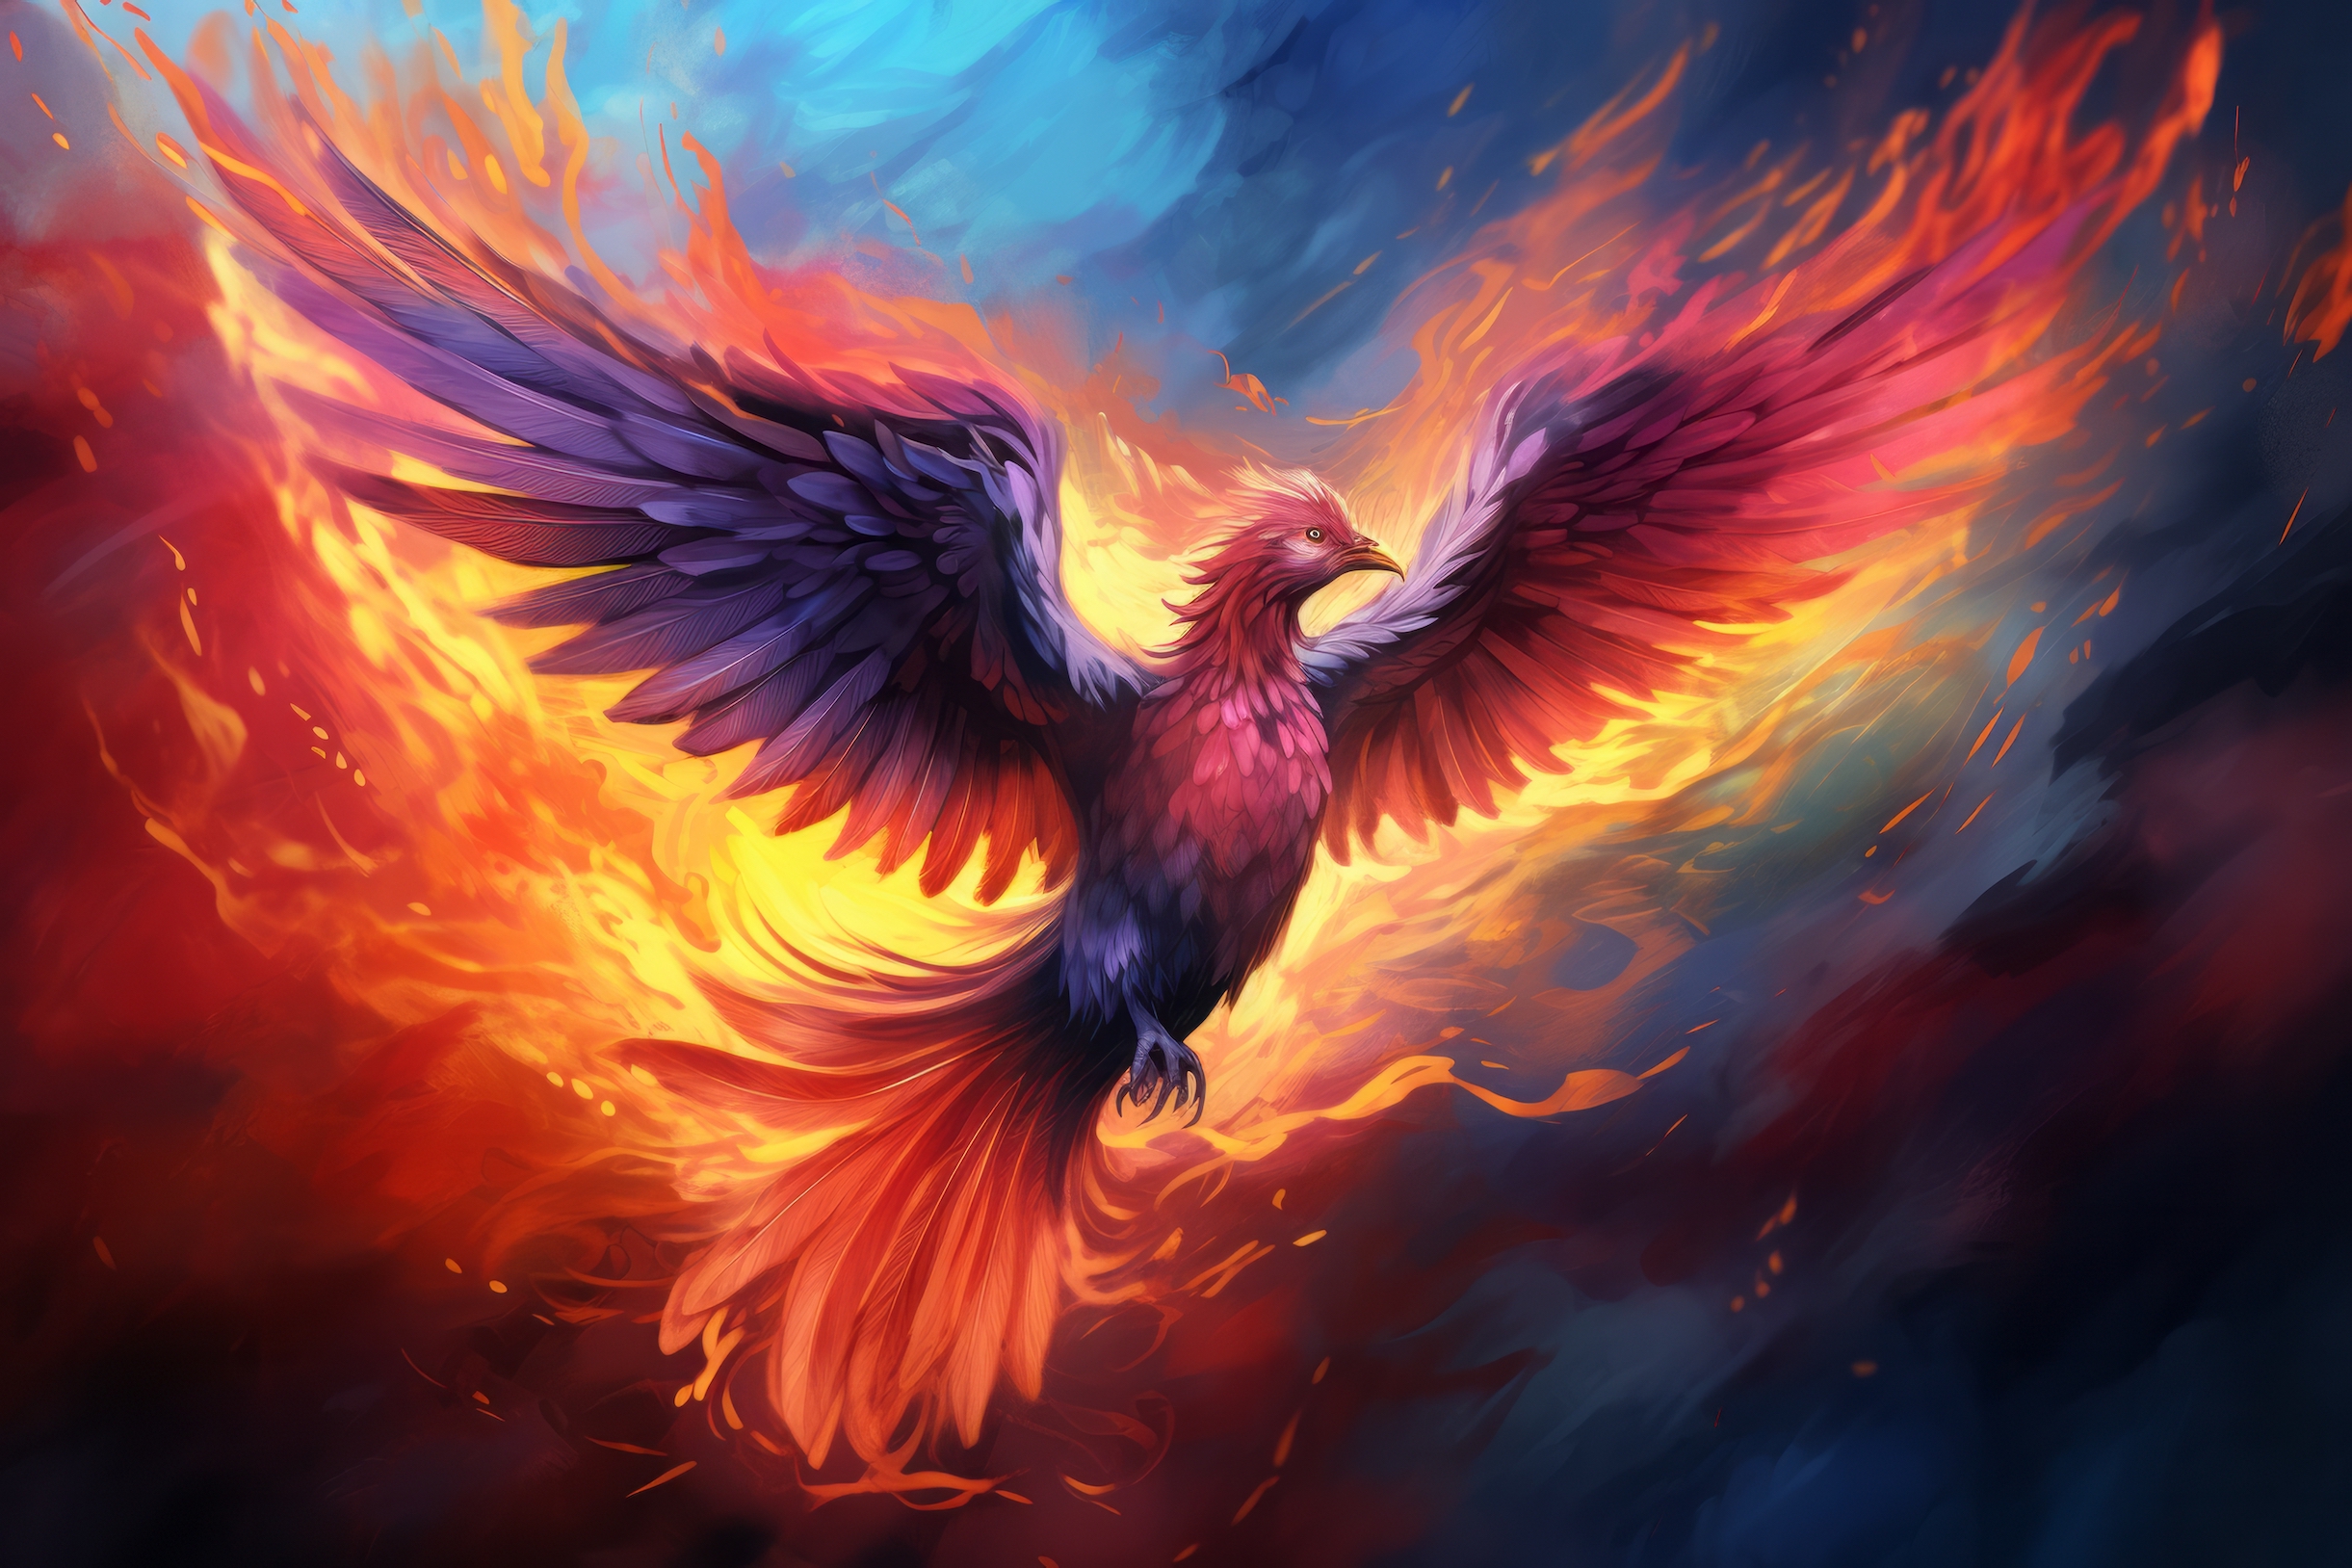 Like the Phoenix, We Rise Above the Ashes